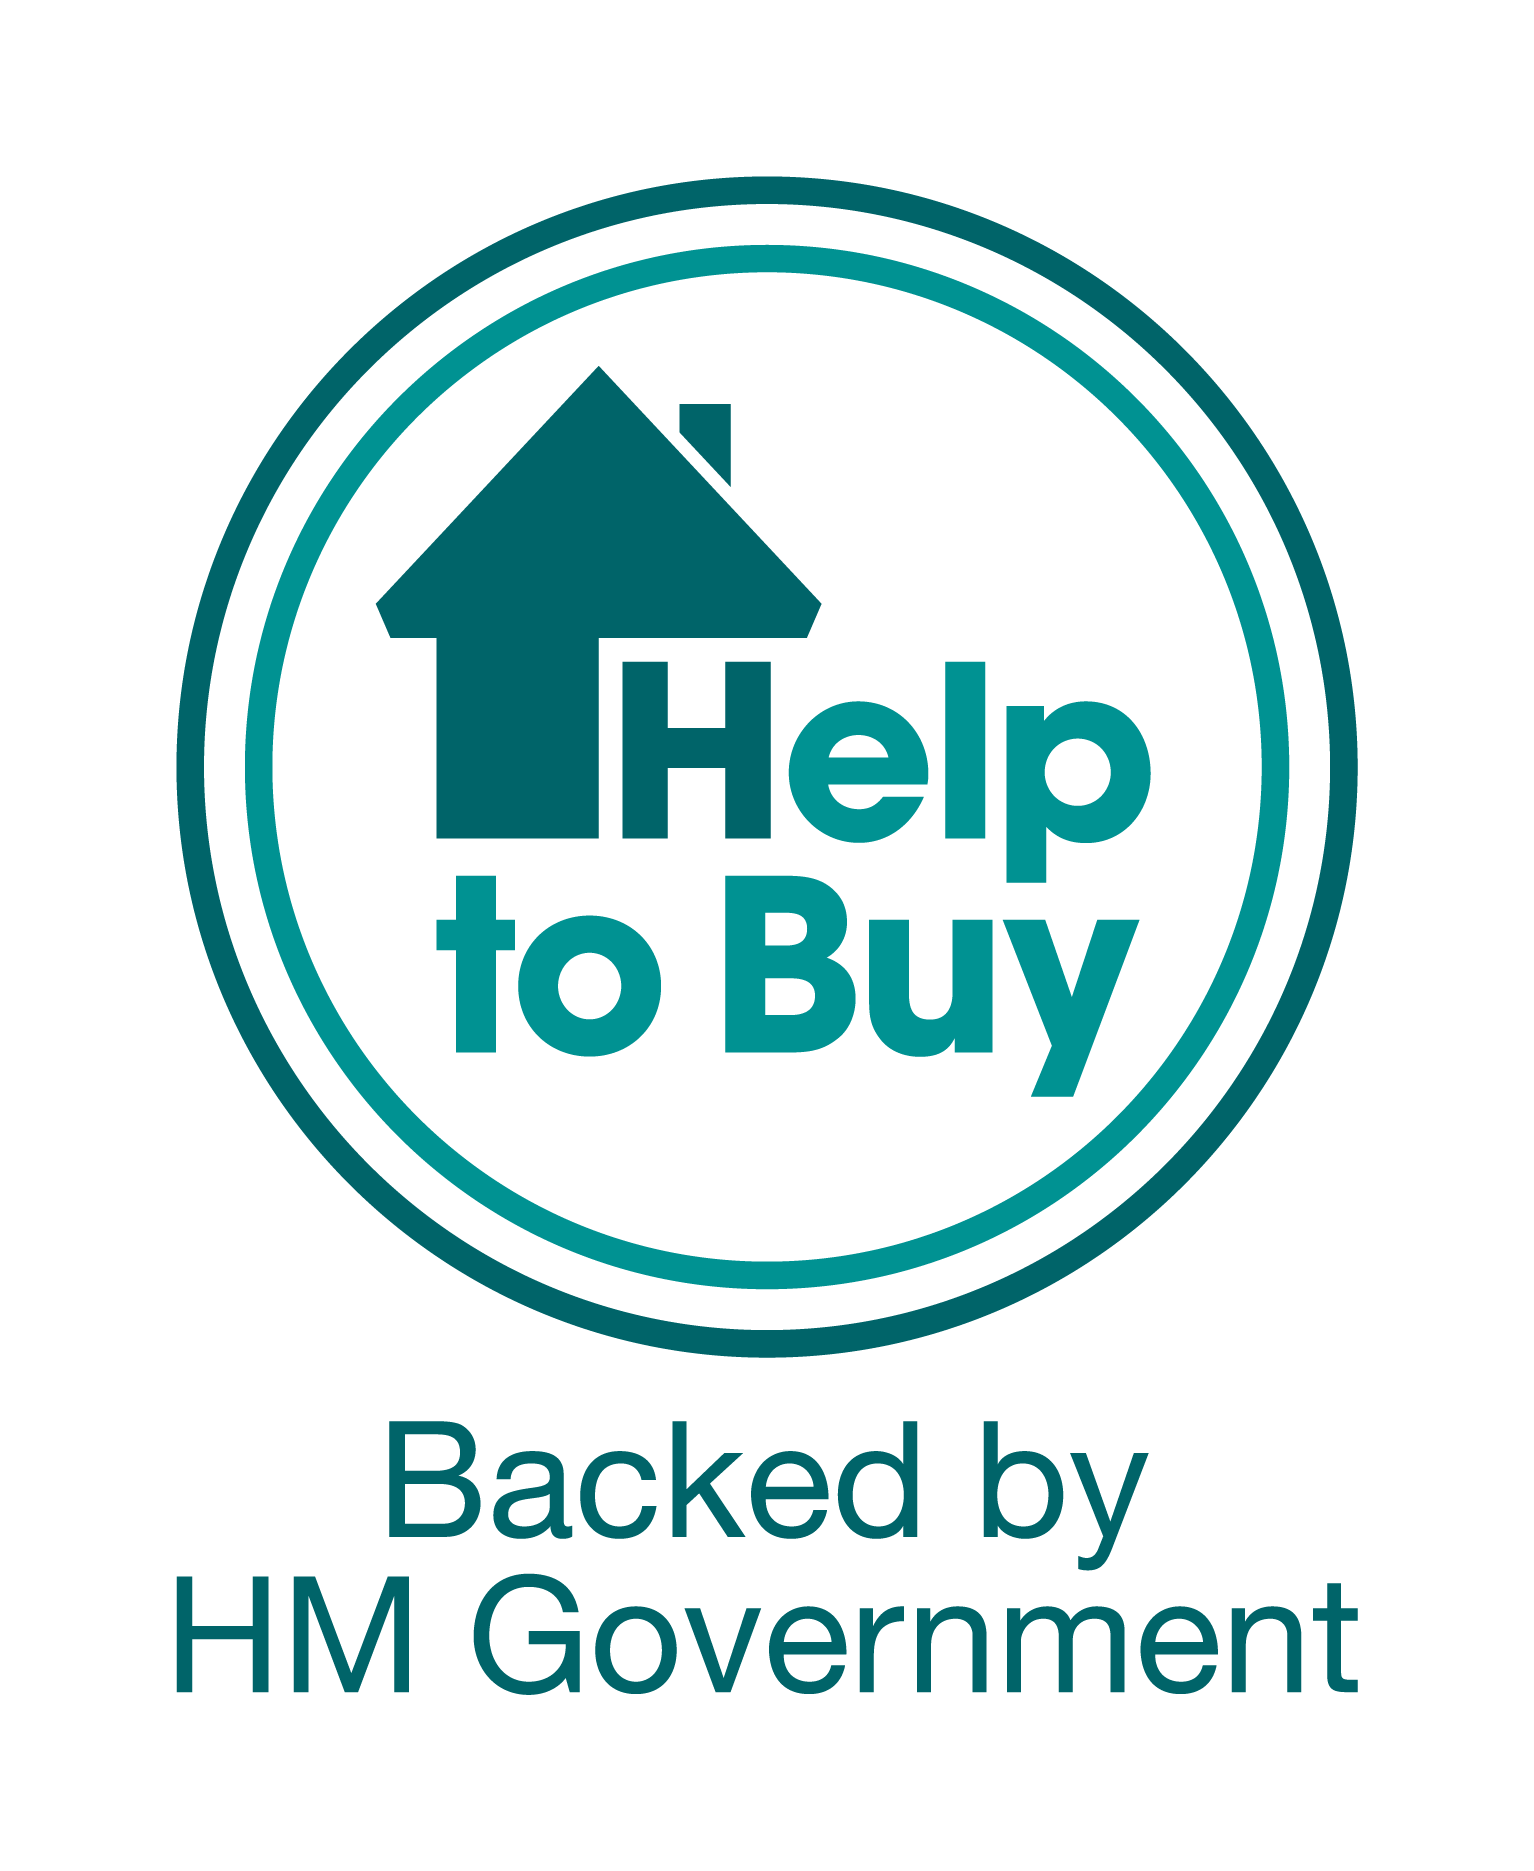 Industry News - Help to Buy helps quarter of million people according to HBF